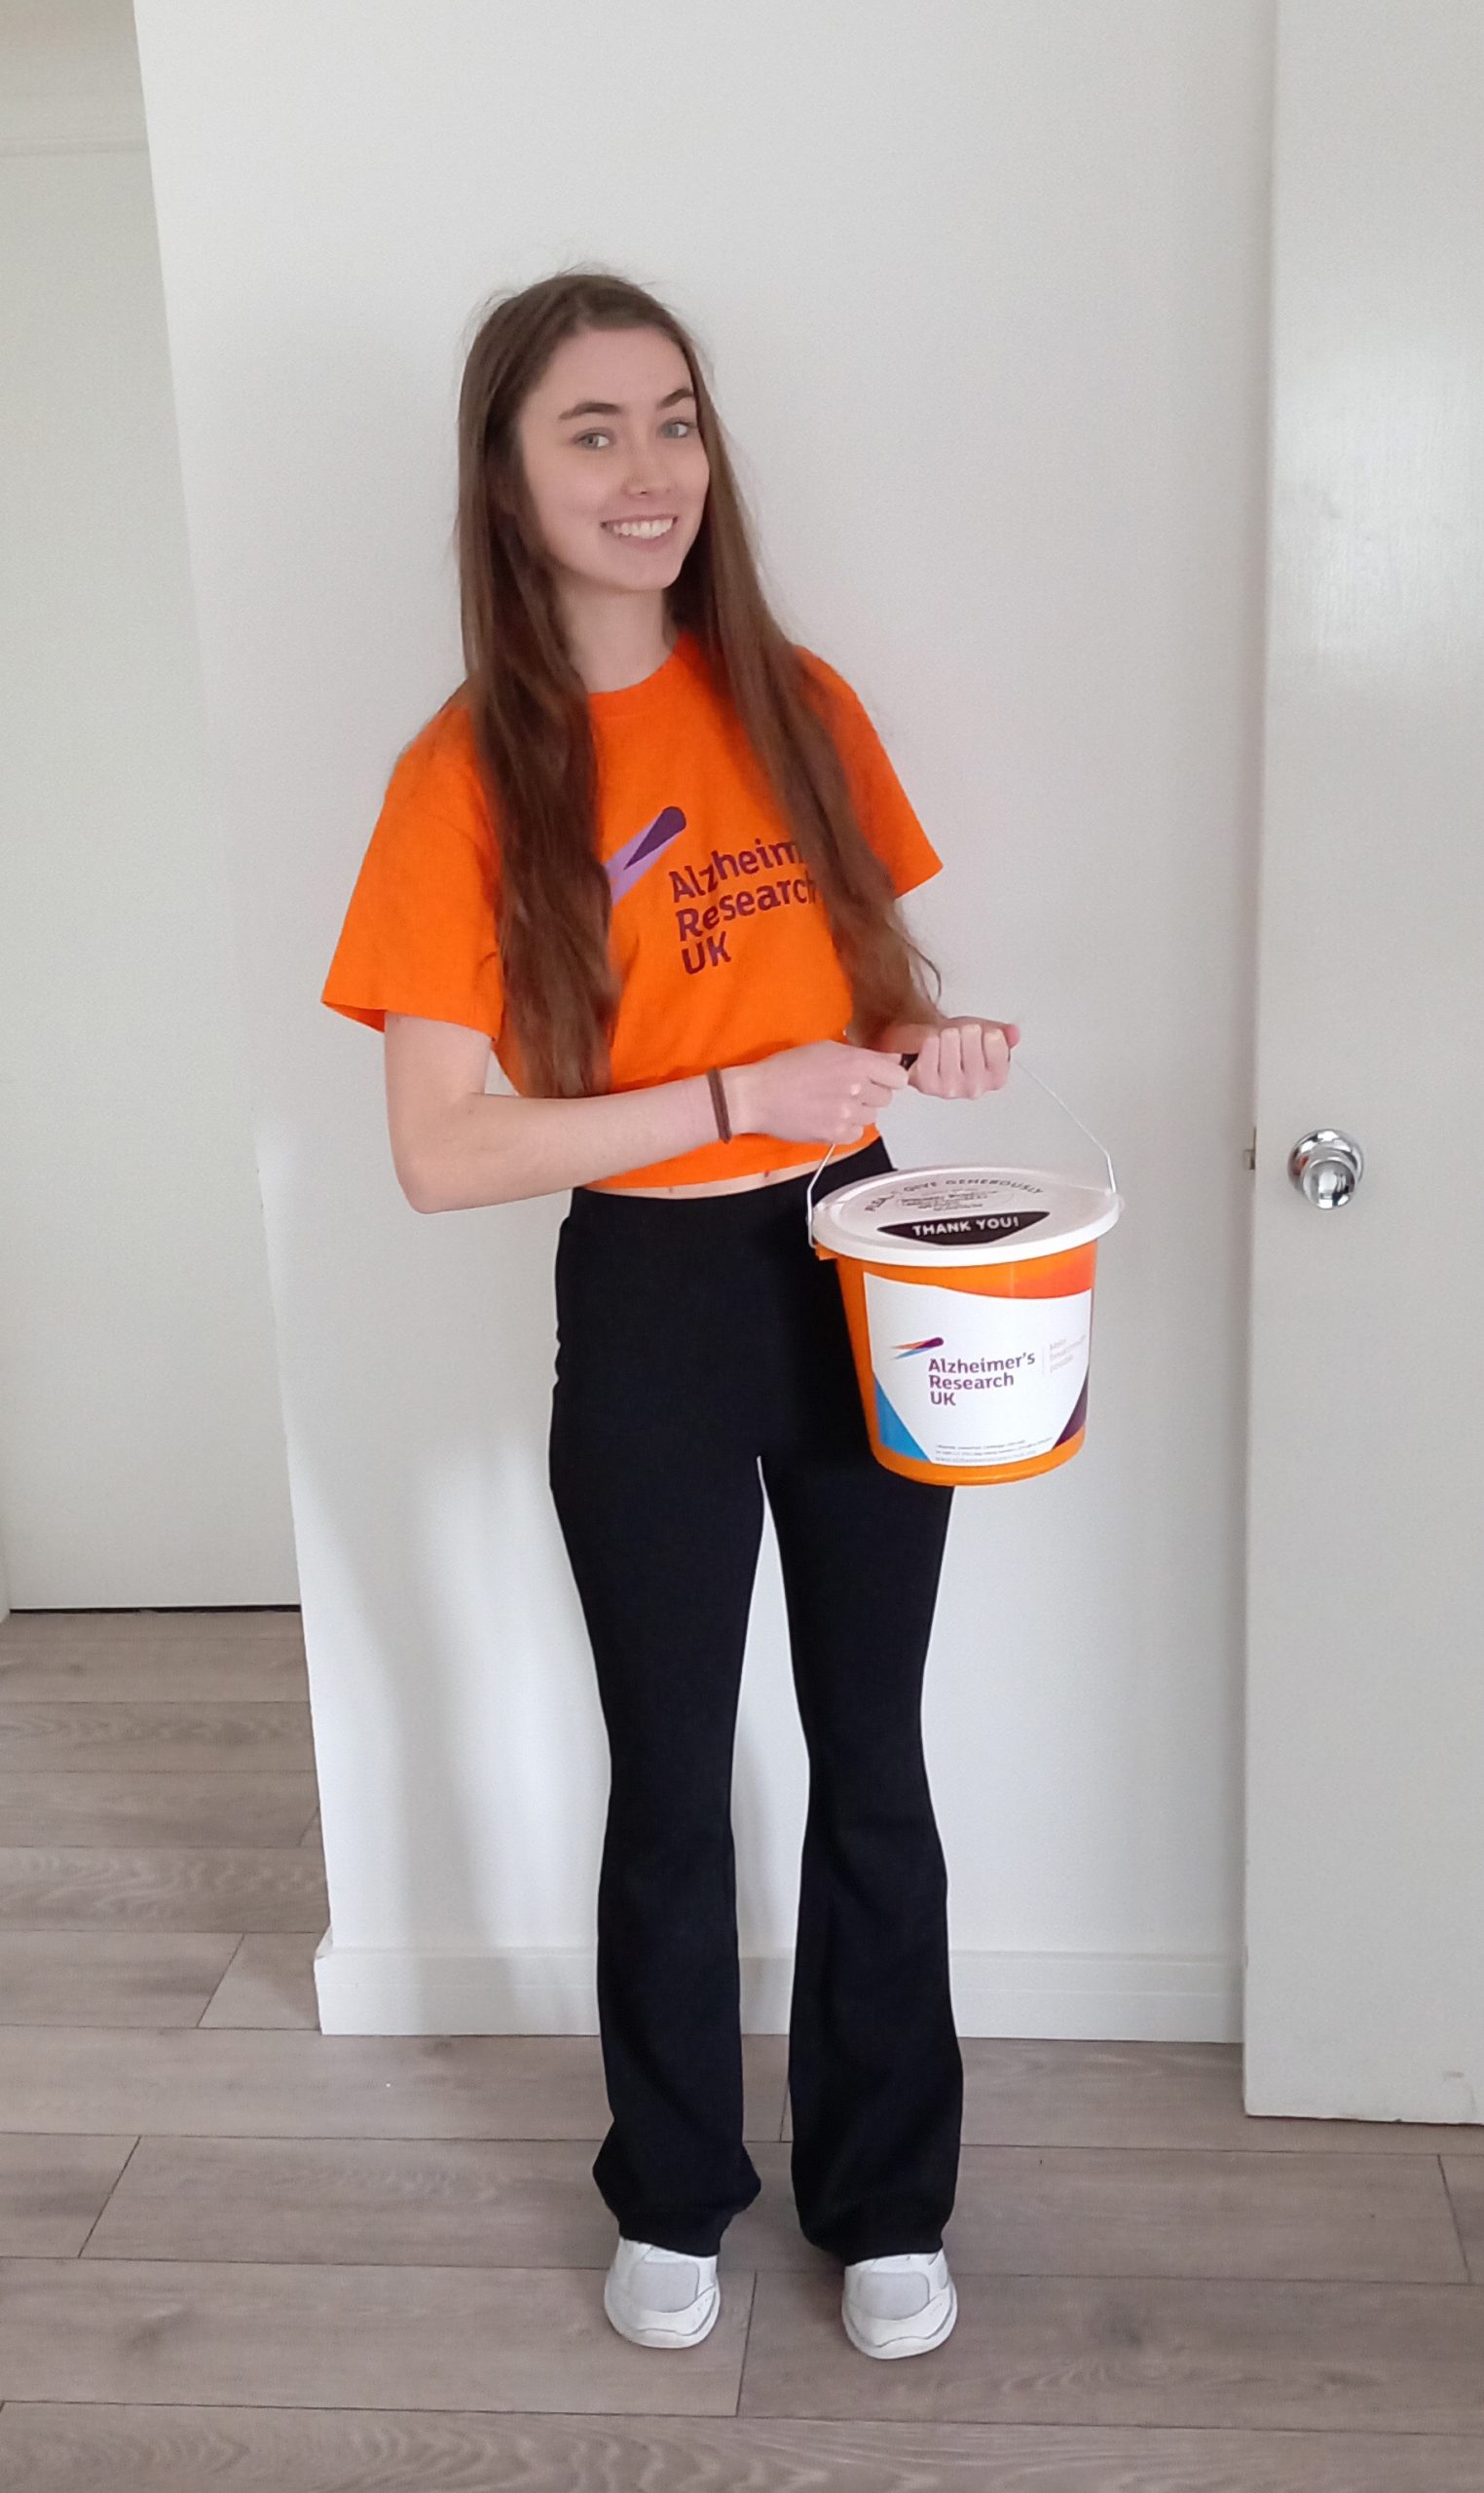 Image of Alicia Cumberland holding a charity bucket for Alzheimer's Research UK